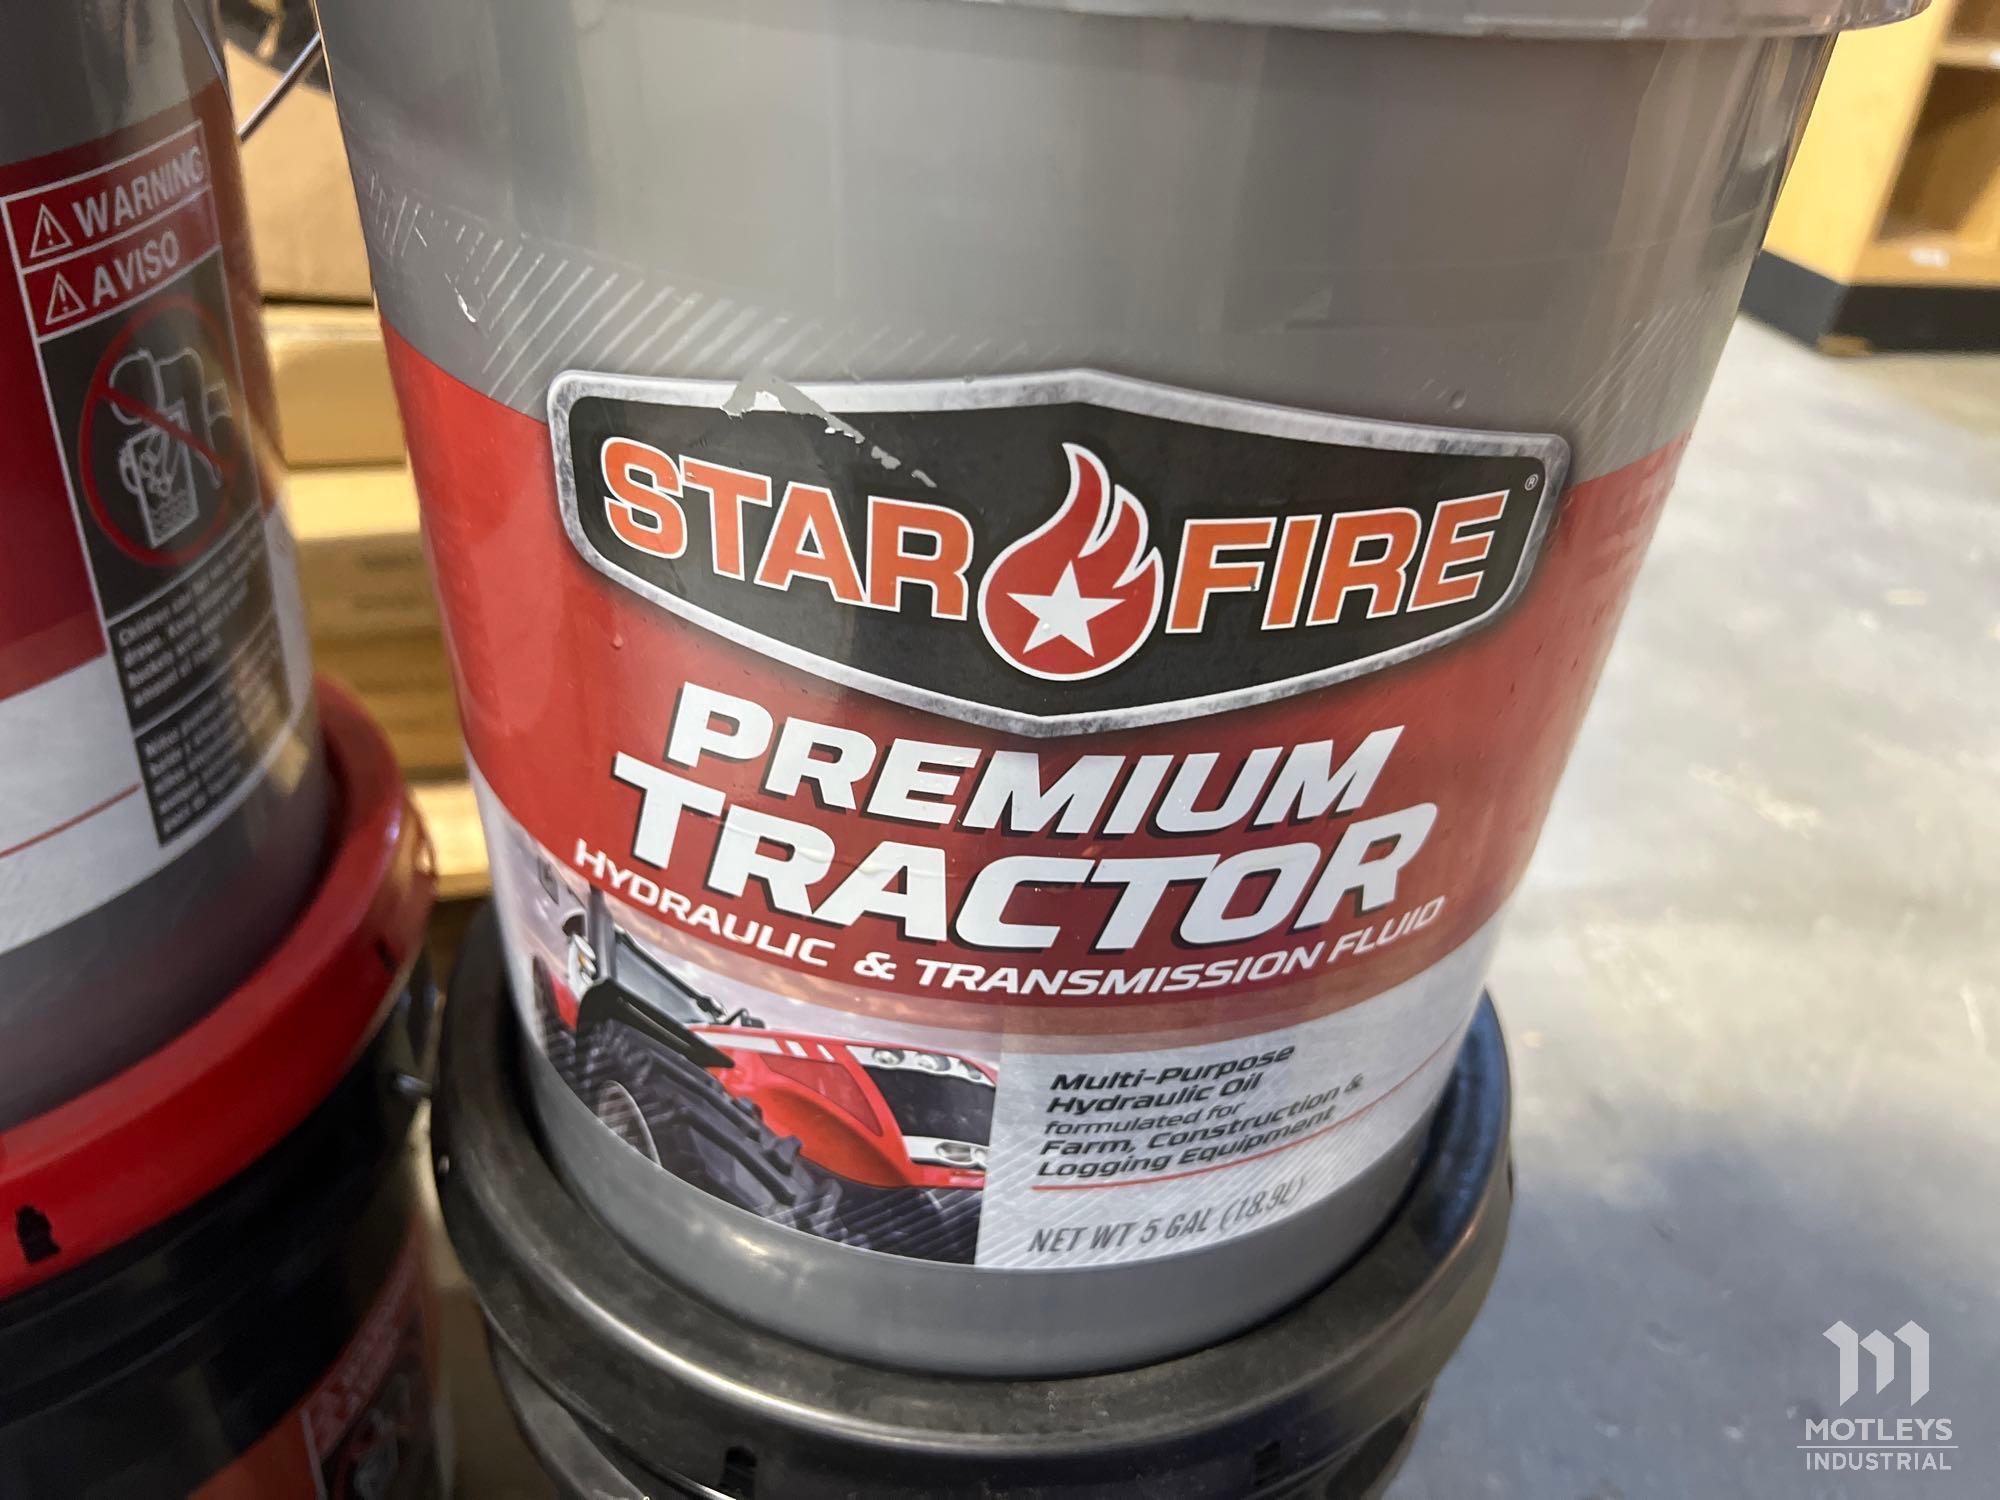 Lot of Hydraulic Oil, Transmission Fluid and Concrete Sealer